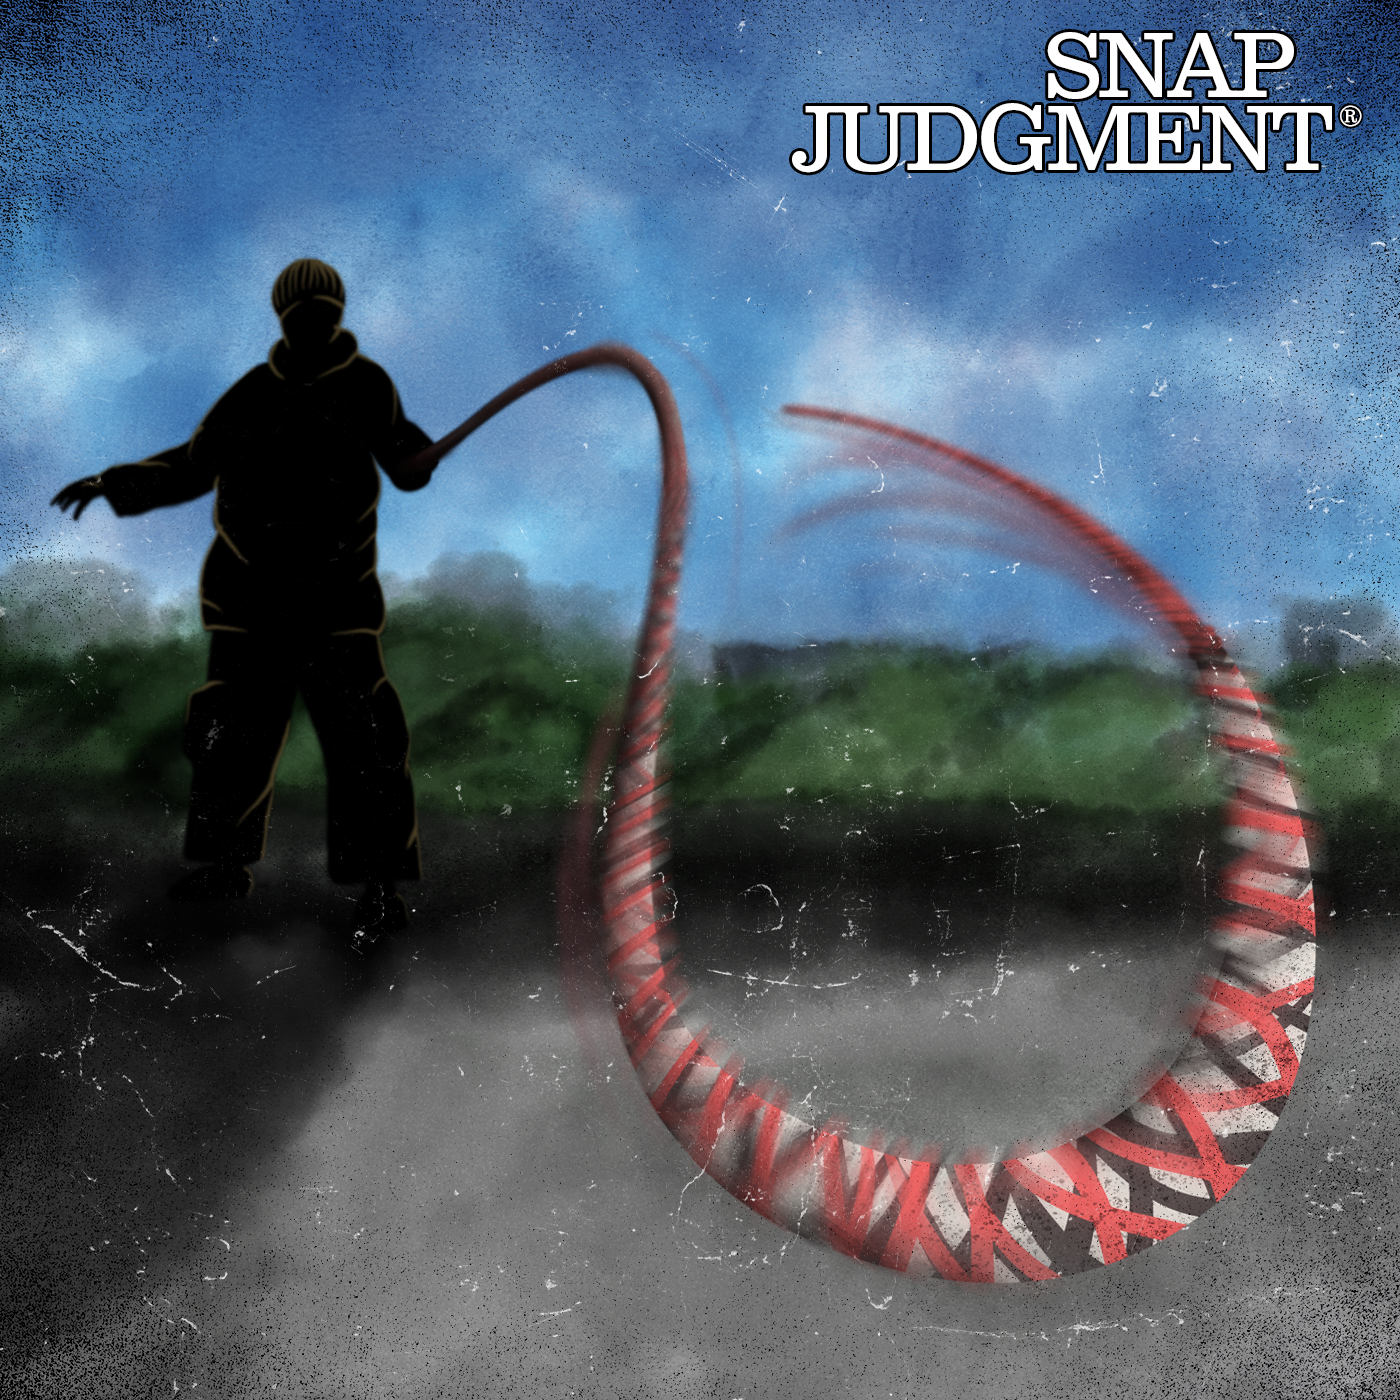 Thumbnail for "Whip Law from The Wind".